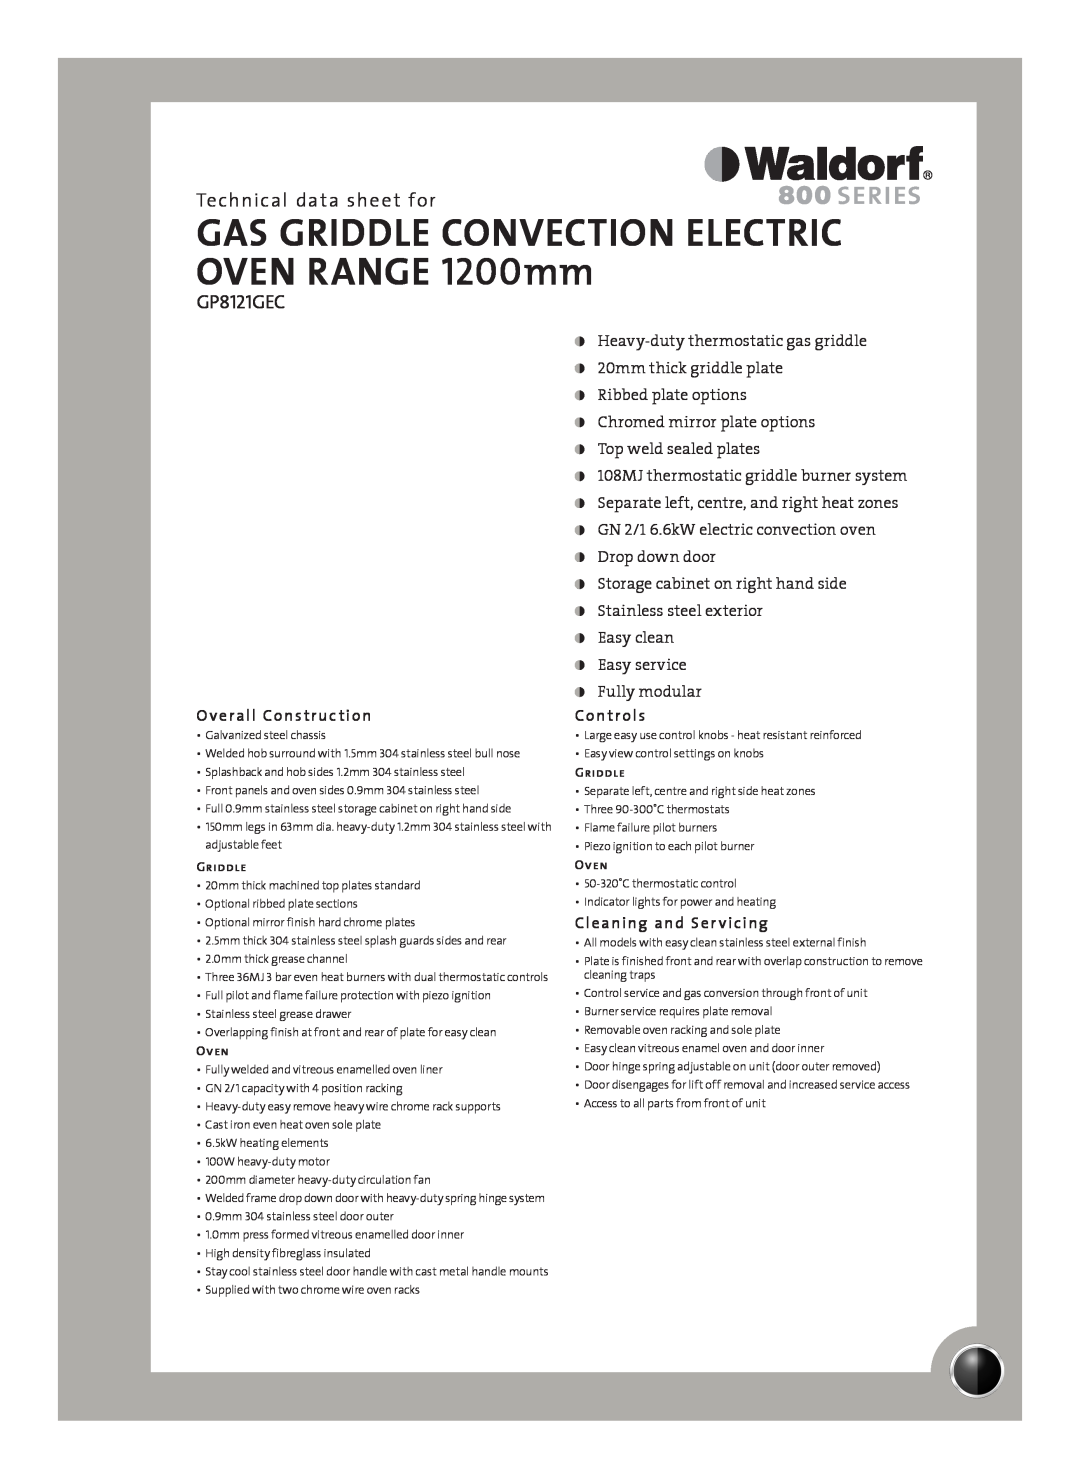 Moffat GP8121GEC manual Technical data sheet for, Overall Construction, Controls, Cleaning and Ser vicing 